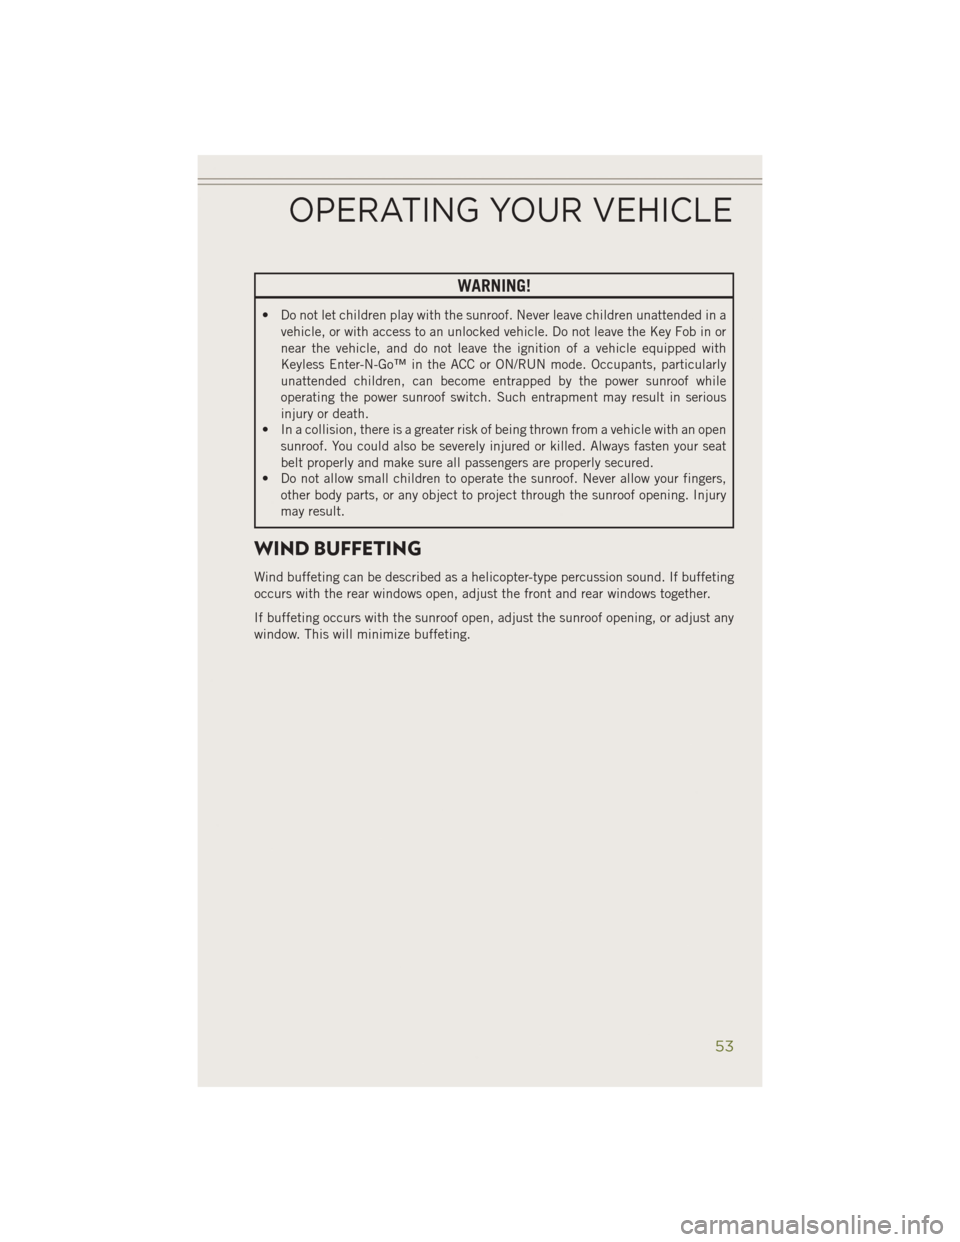 JEEP CHEROKEE 2014 KL / 5.G Owners Manual WARNING!
• Do not let children play with the sunroof. Never leave children unattended in avehicle, or with access to an unlocked vehicle. Do not leave the Key Fob in or
near the vehicle, and do not 